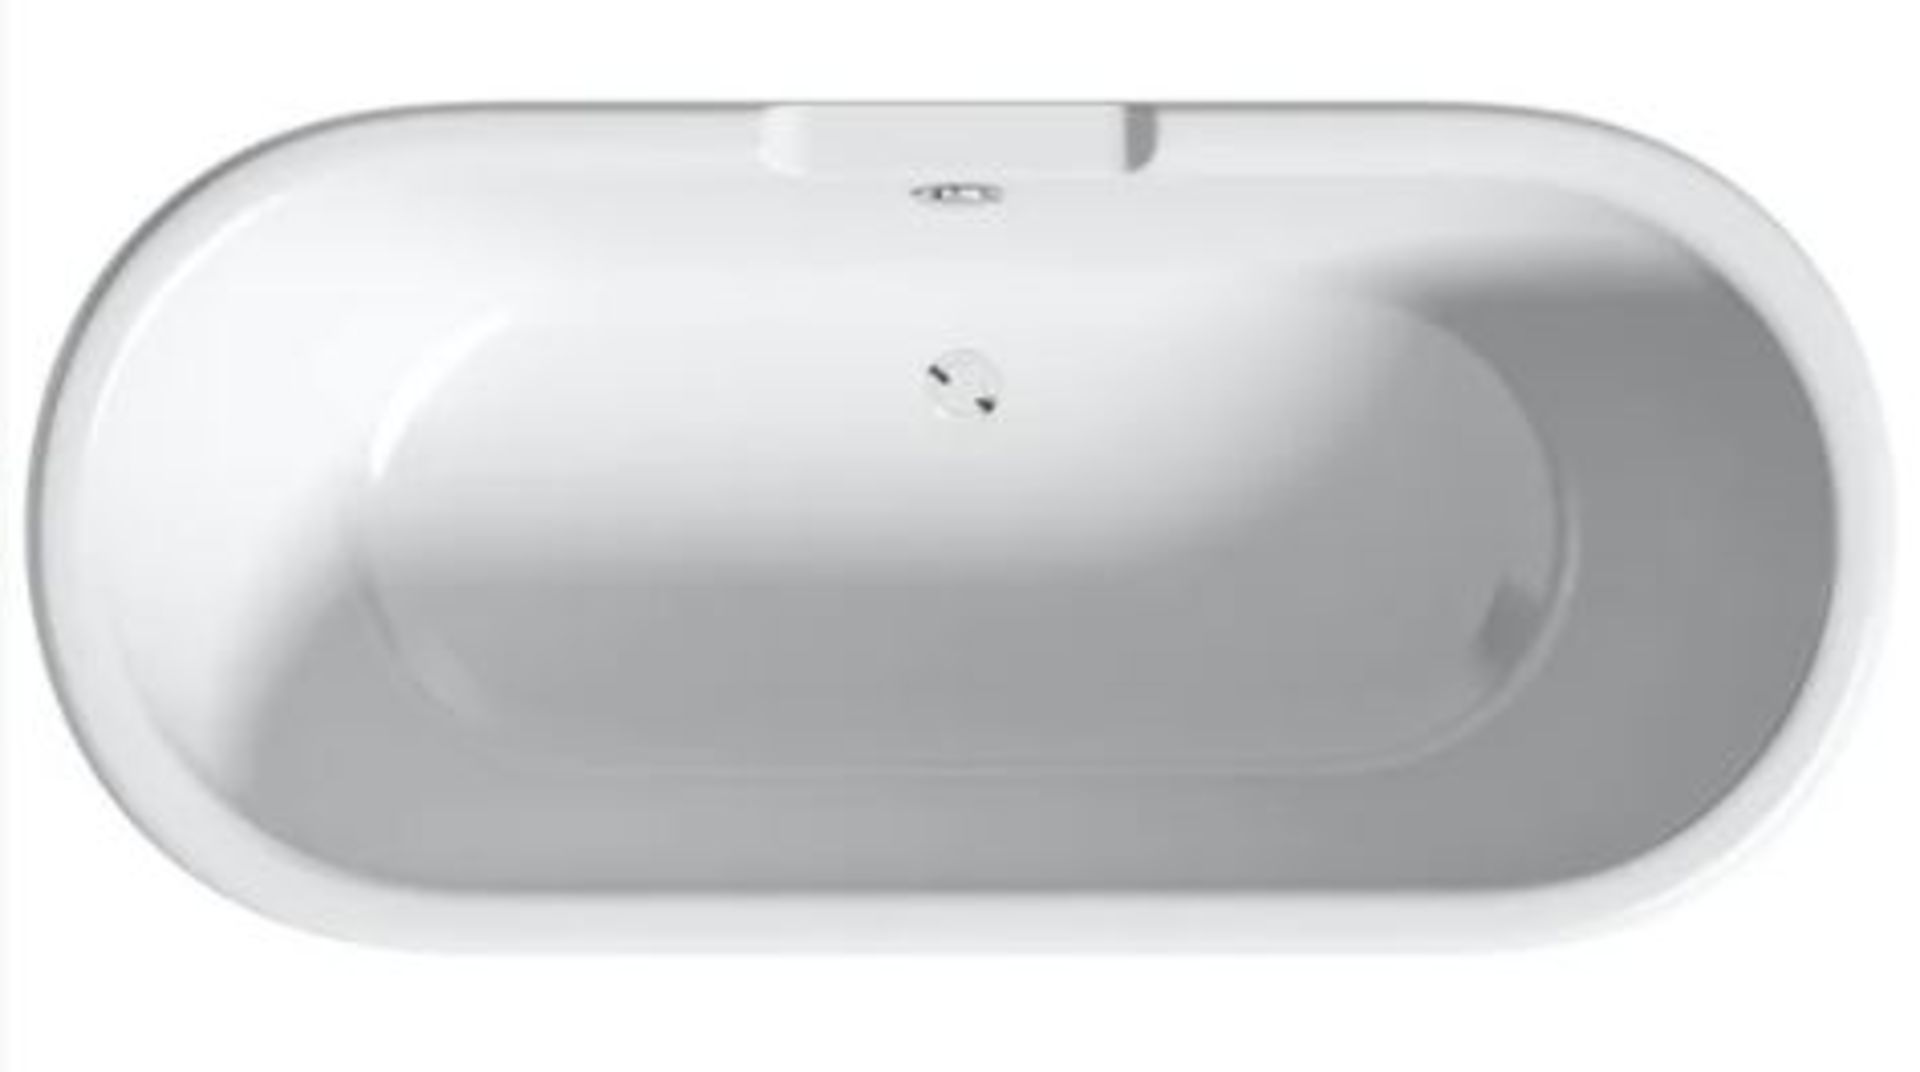 1 X Traditional Double Ended Roll Top Bath 1750 X 800 (jl659-1750) RRP £369 - Image 6 of 9